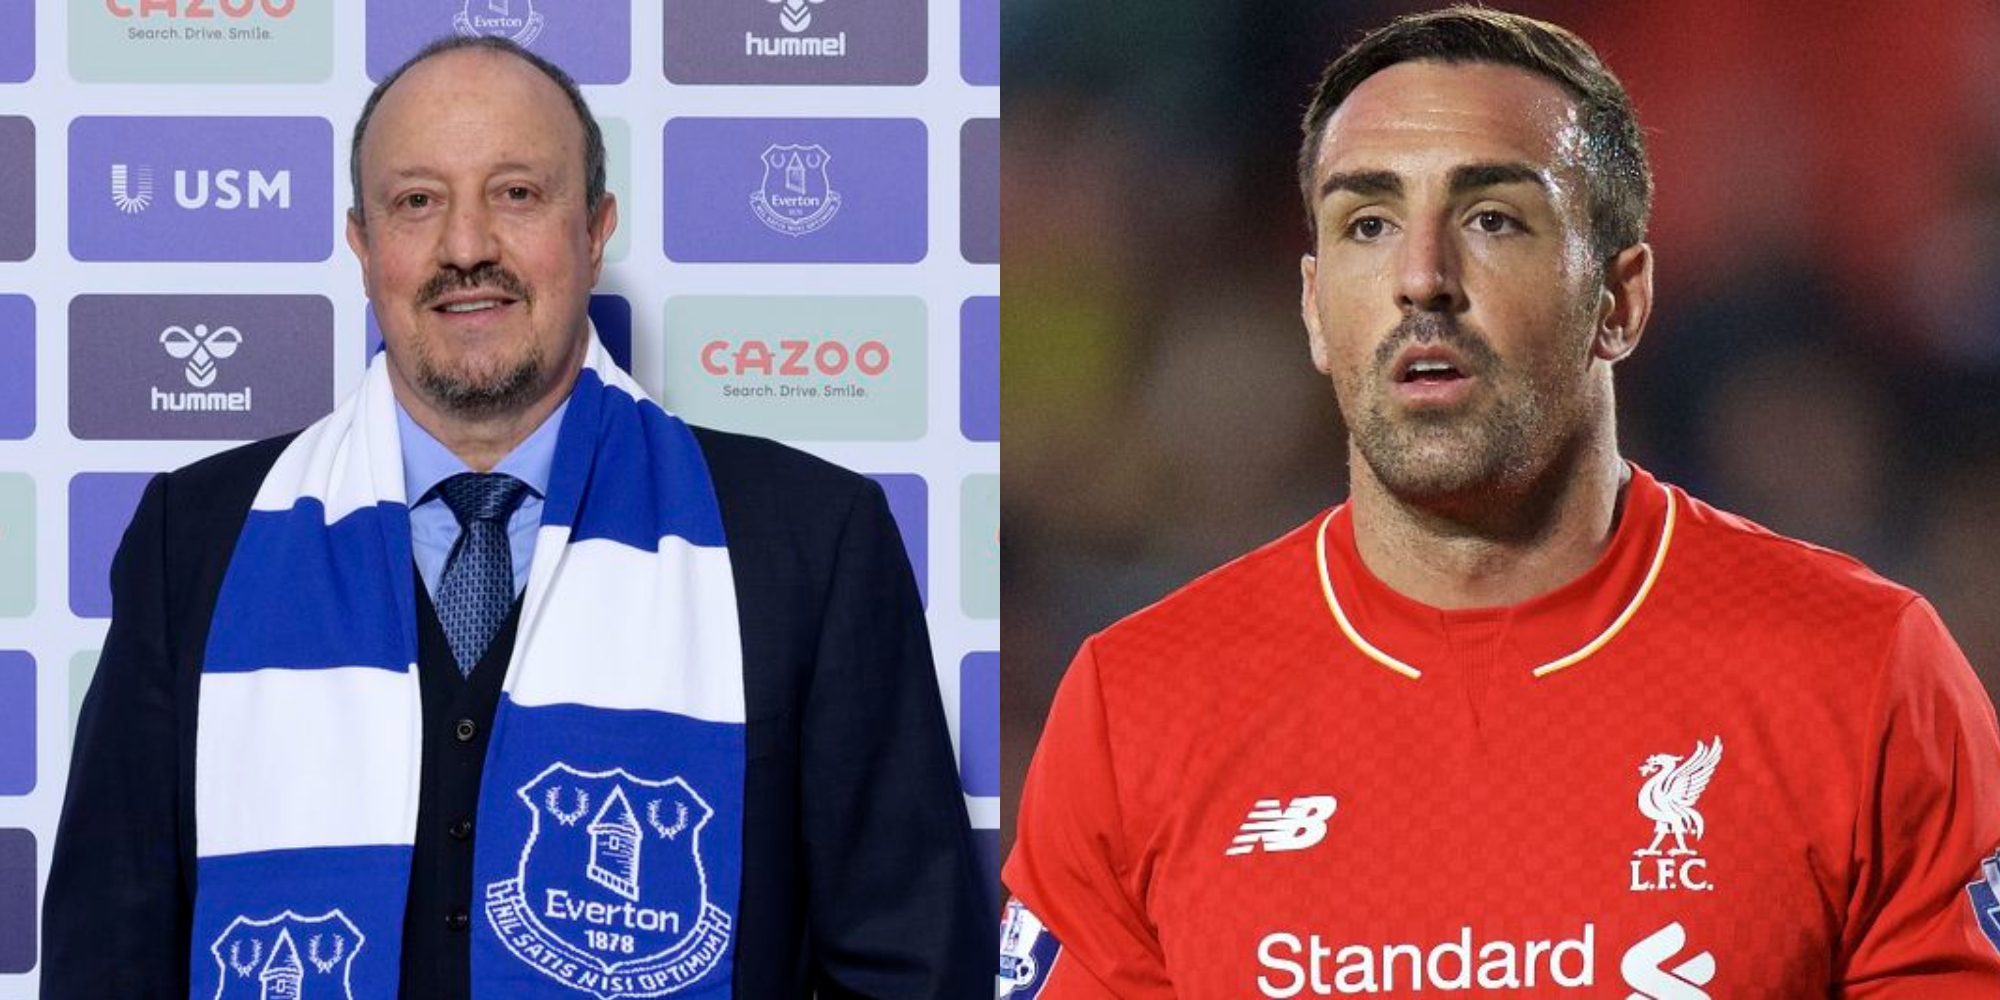 Rafa Benitez is making a mistake by joining Everton, says former Liverpool player: ‘I wouldn’t have gone there’